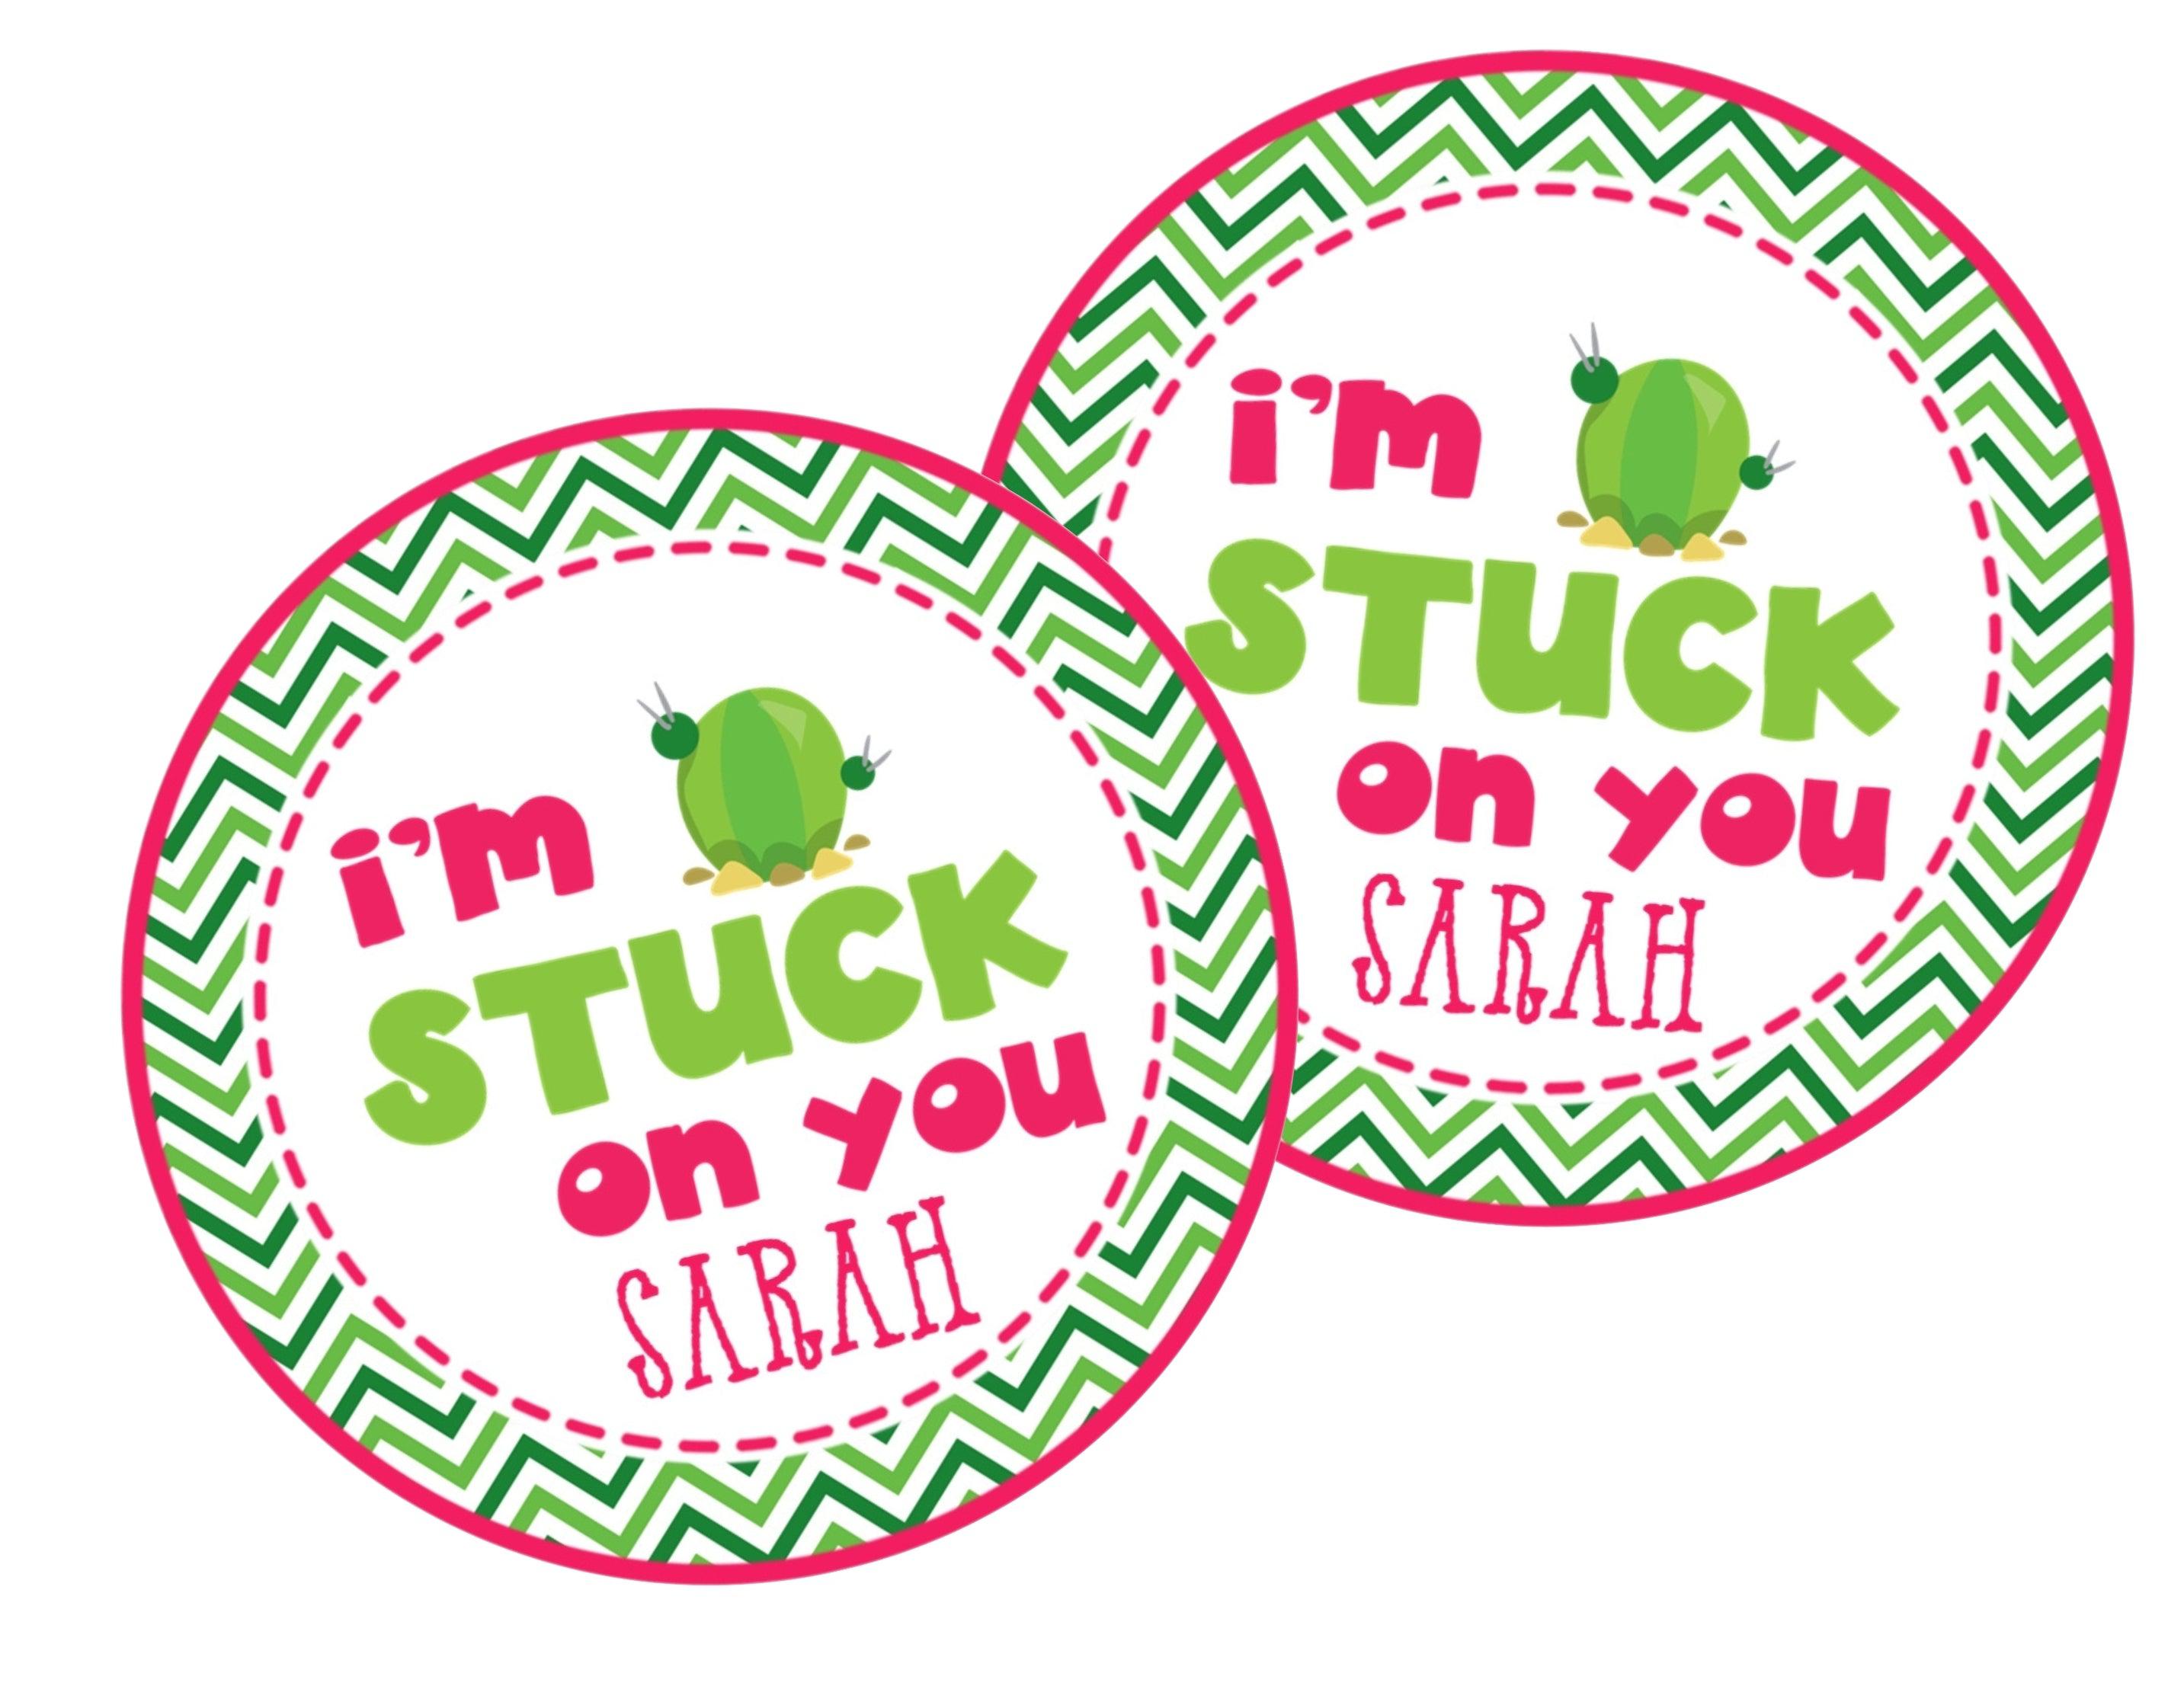 Cactus Birthday Party Stickers Or Favor Tags